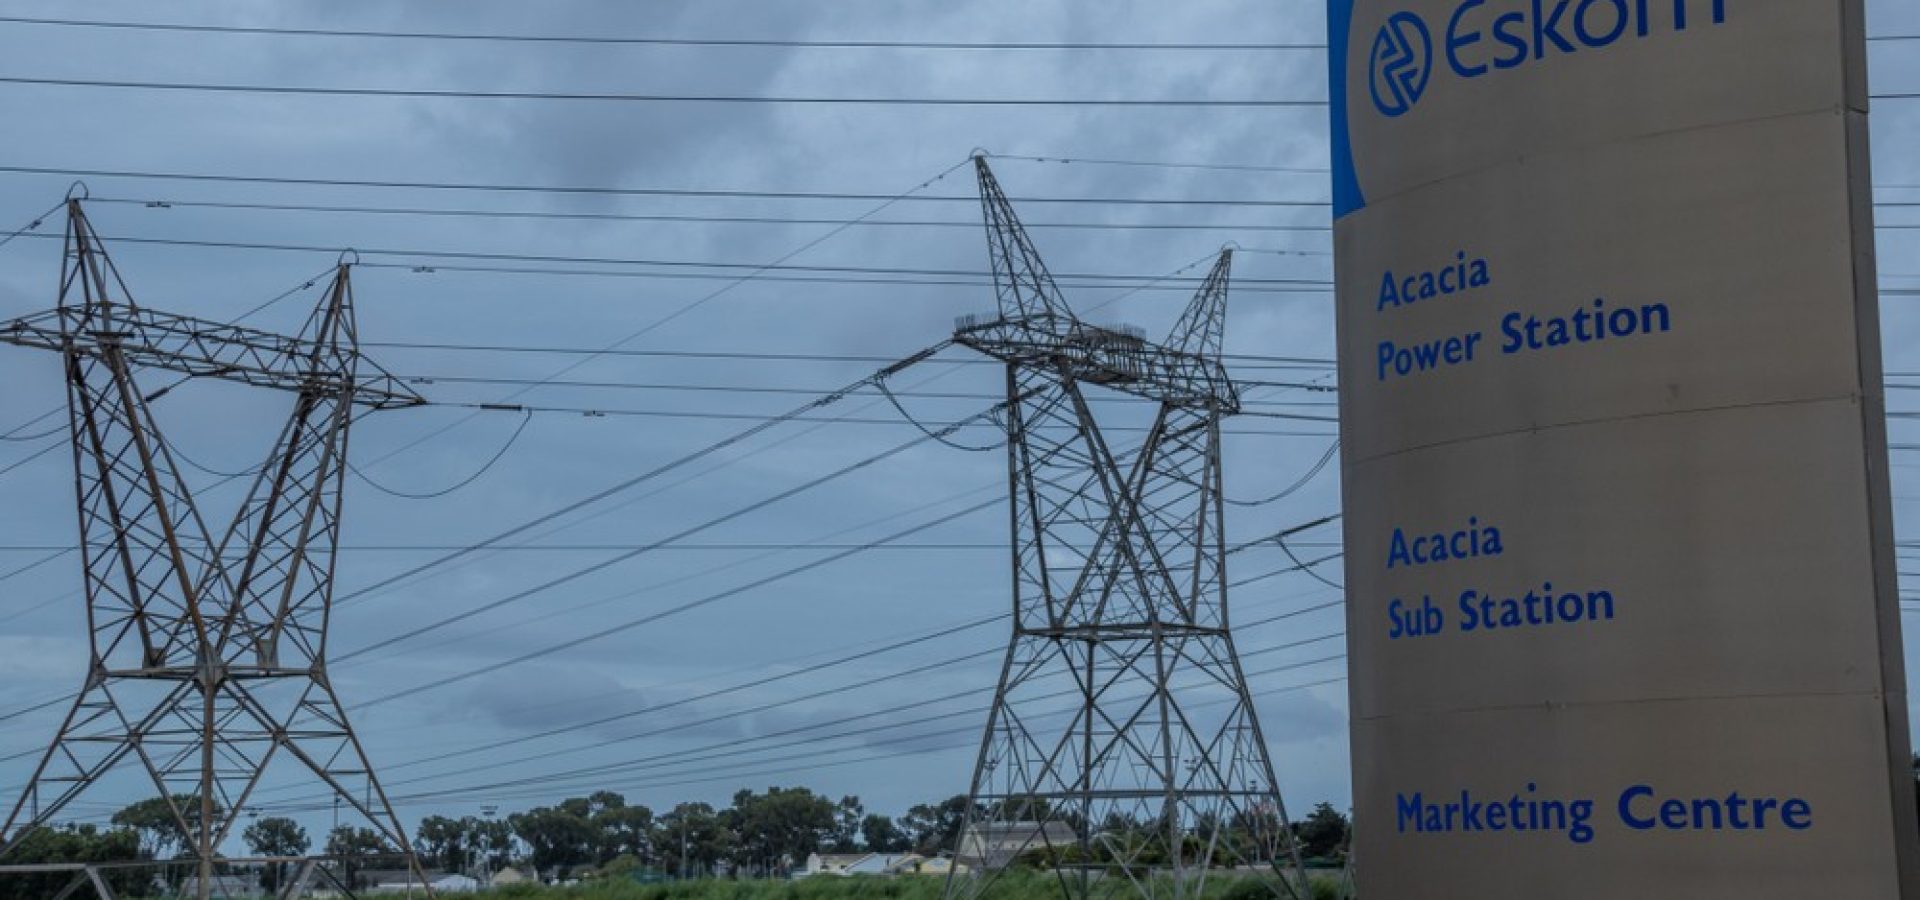 Wibest – South African: Eskom towes and the company's logo.